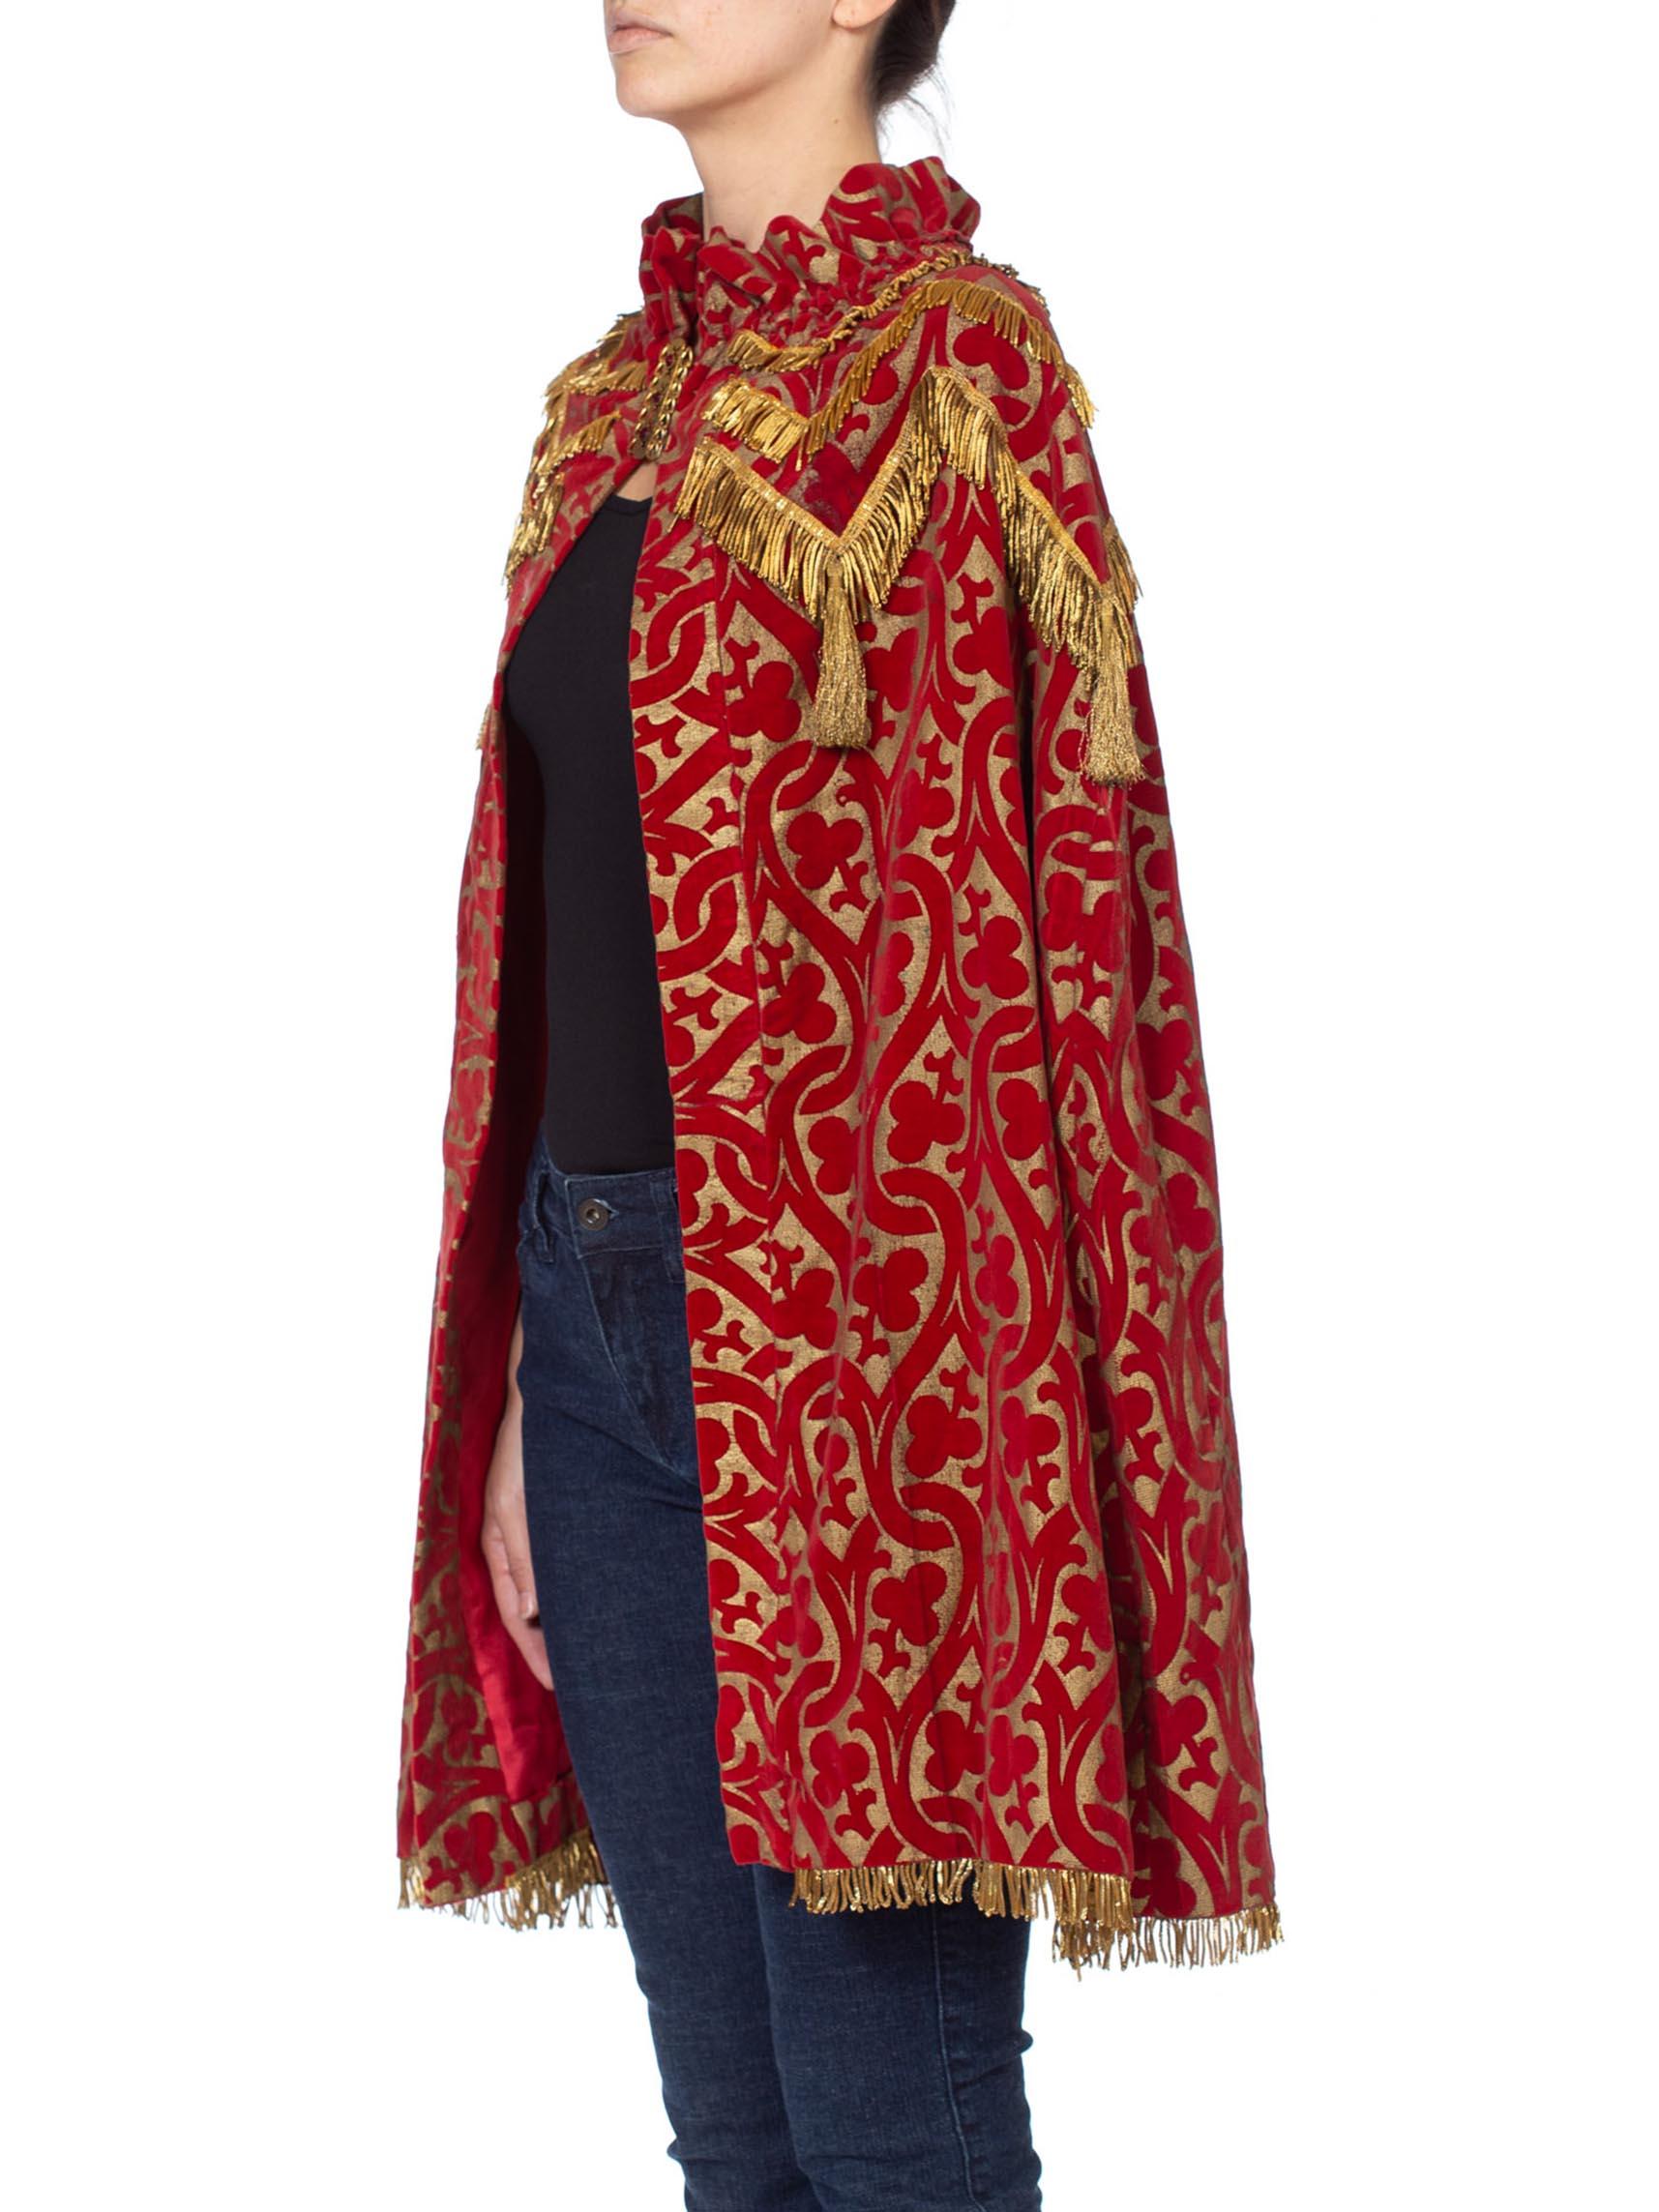 Women's or Men's MORPHEW COLLECTION Red Metallic Printed Velvet Silk Lined Cape With Real Gold B For Sale